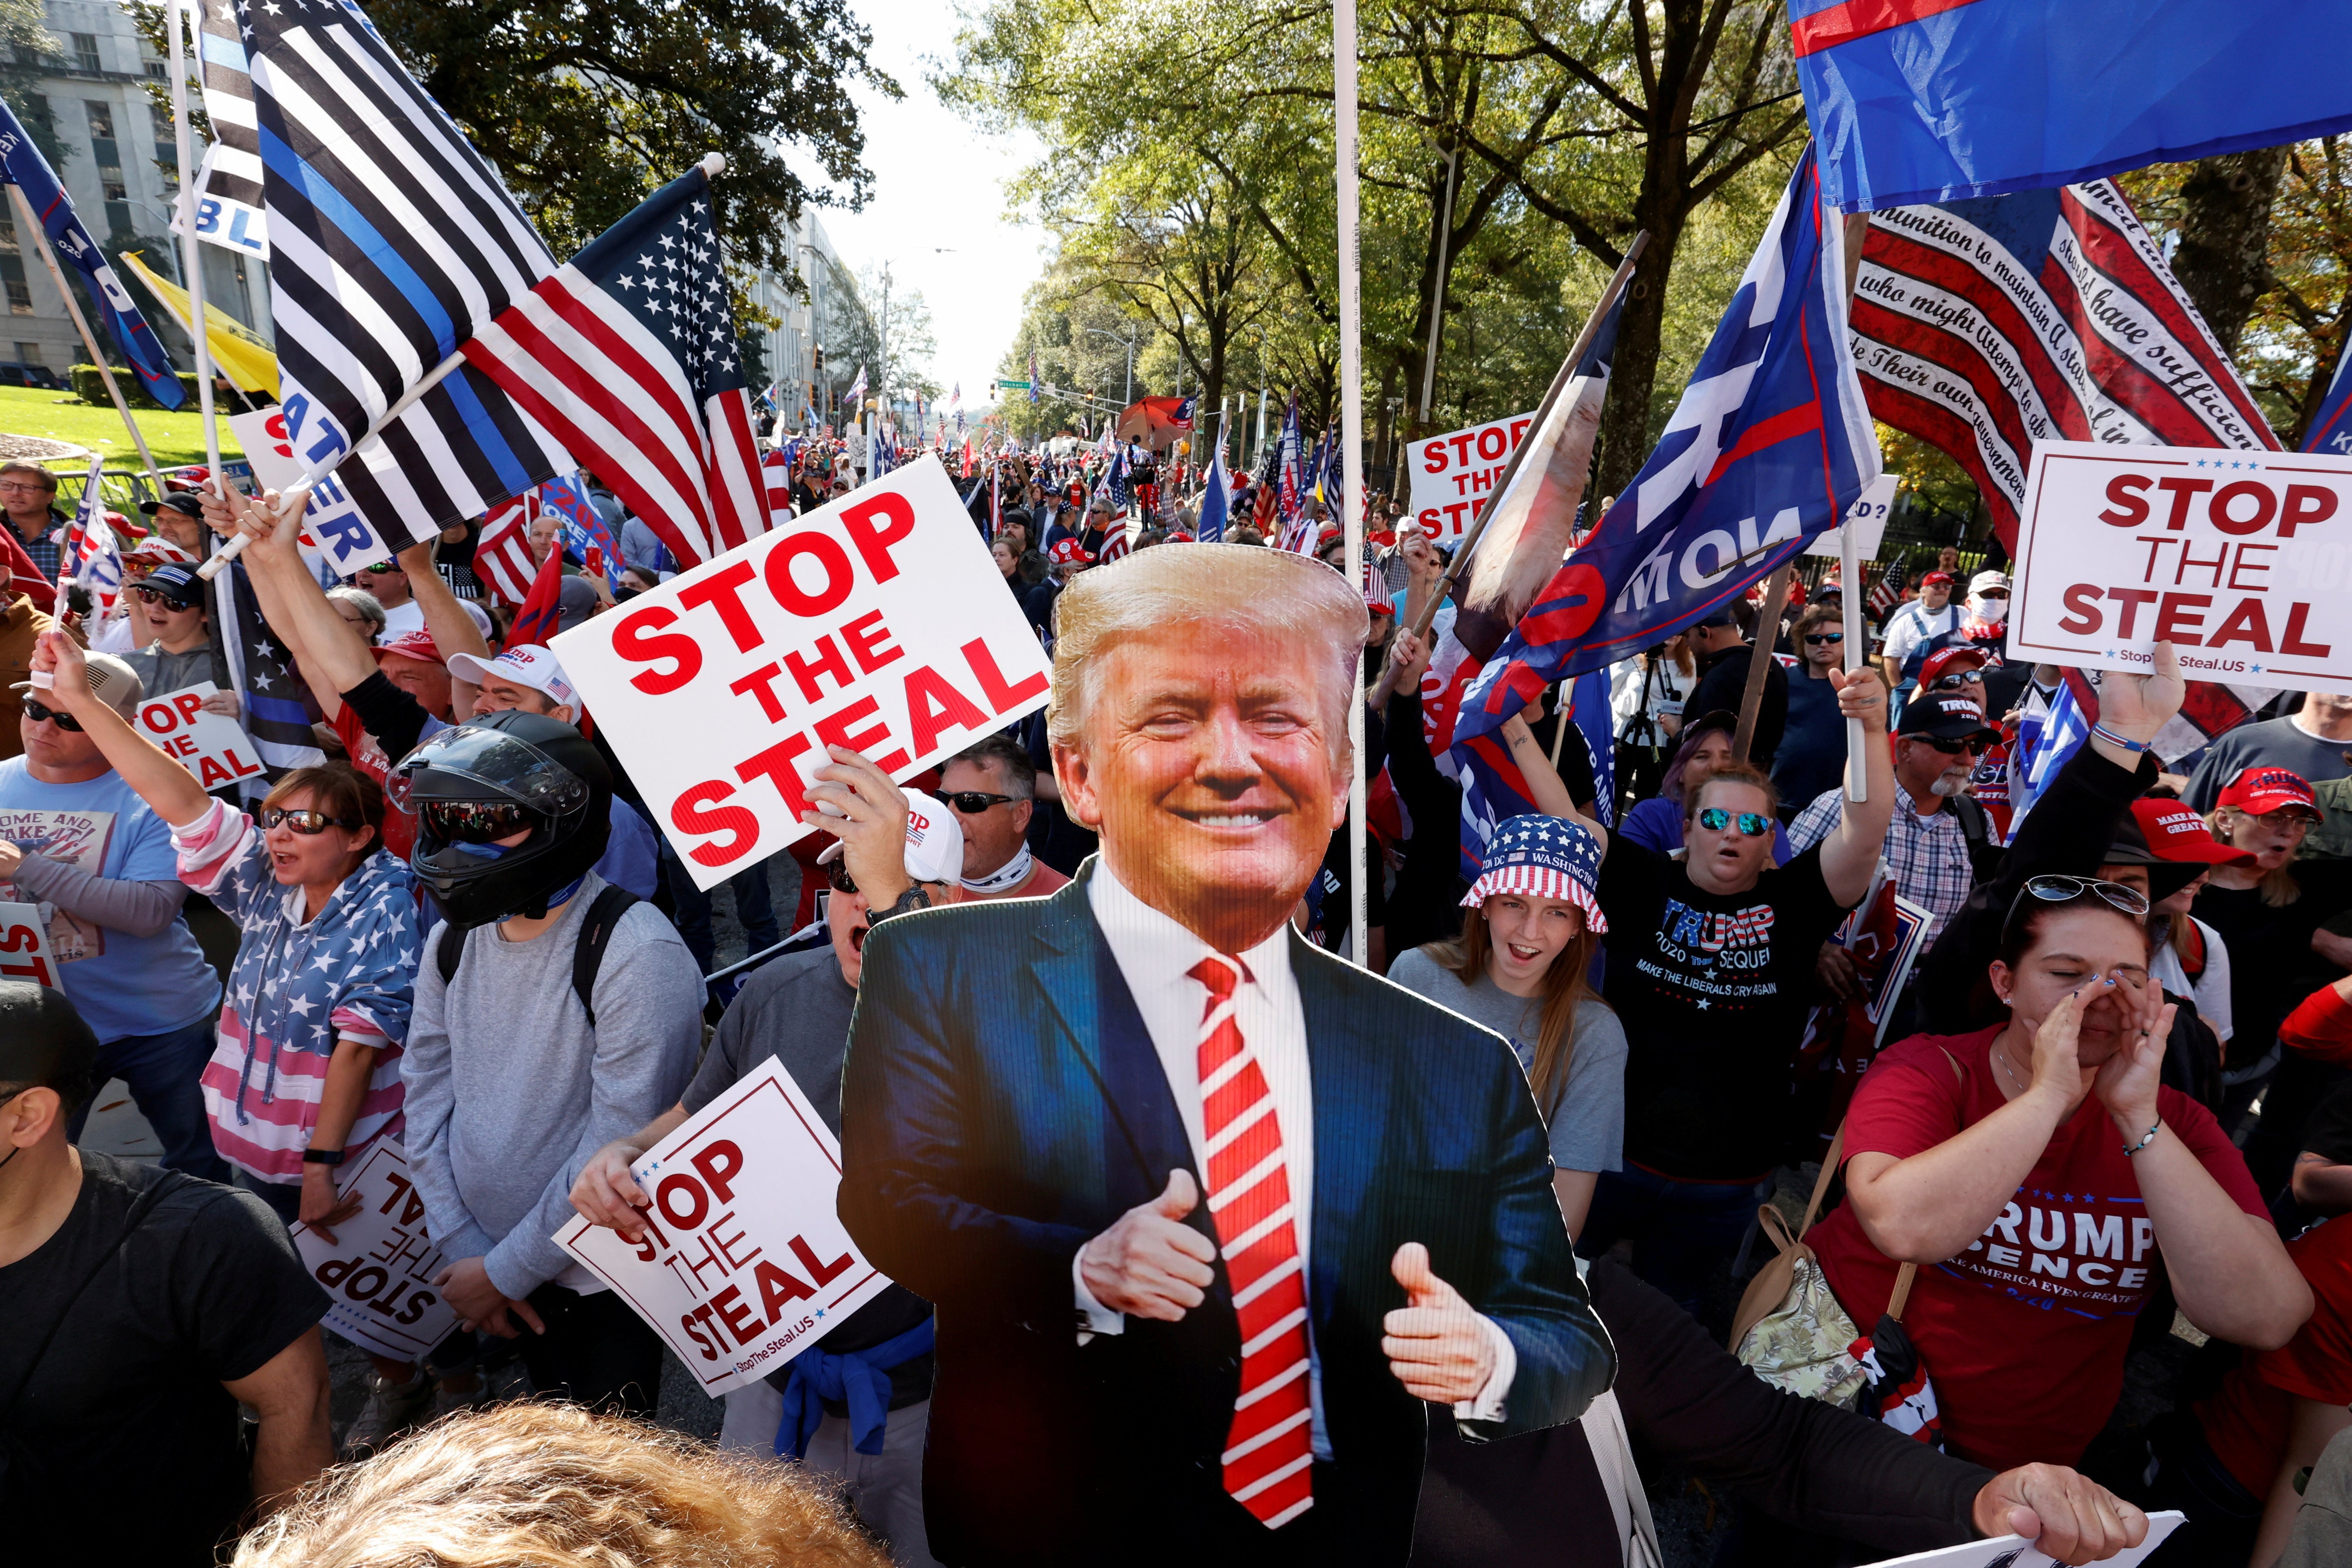 Cardboard cutout of Trump and people carrying "Stop the Steal" signs